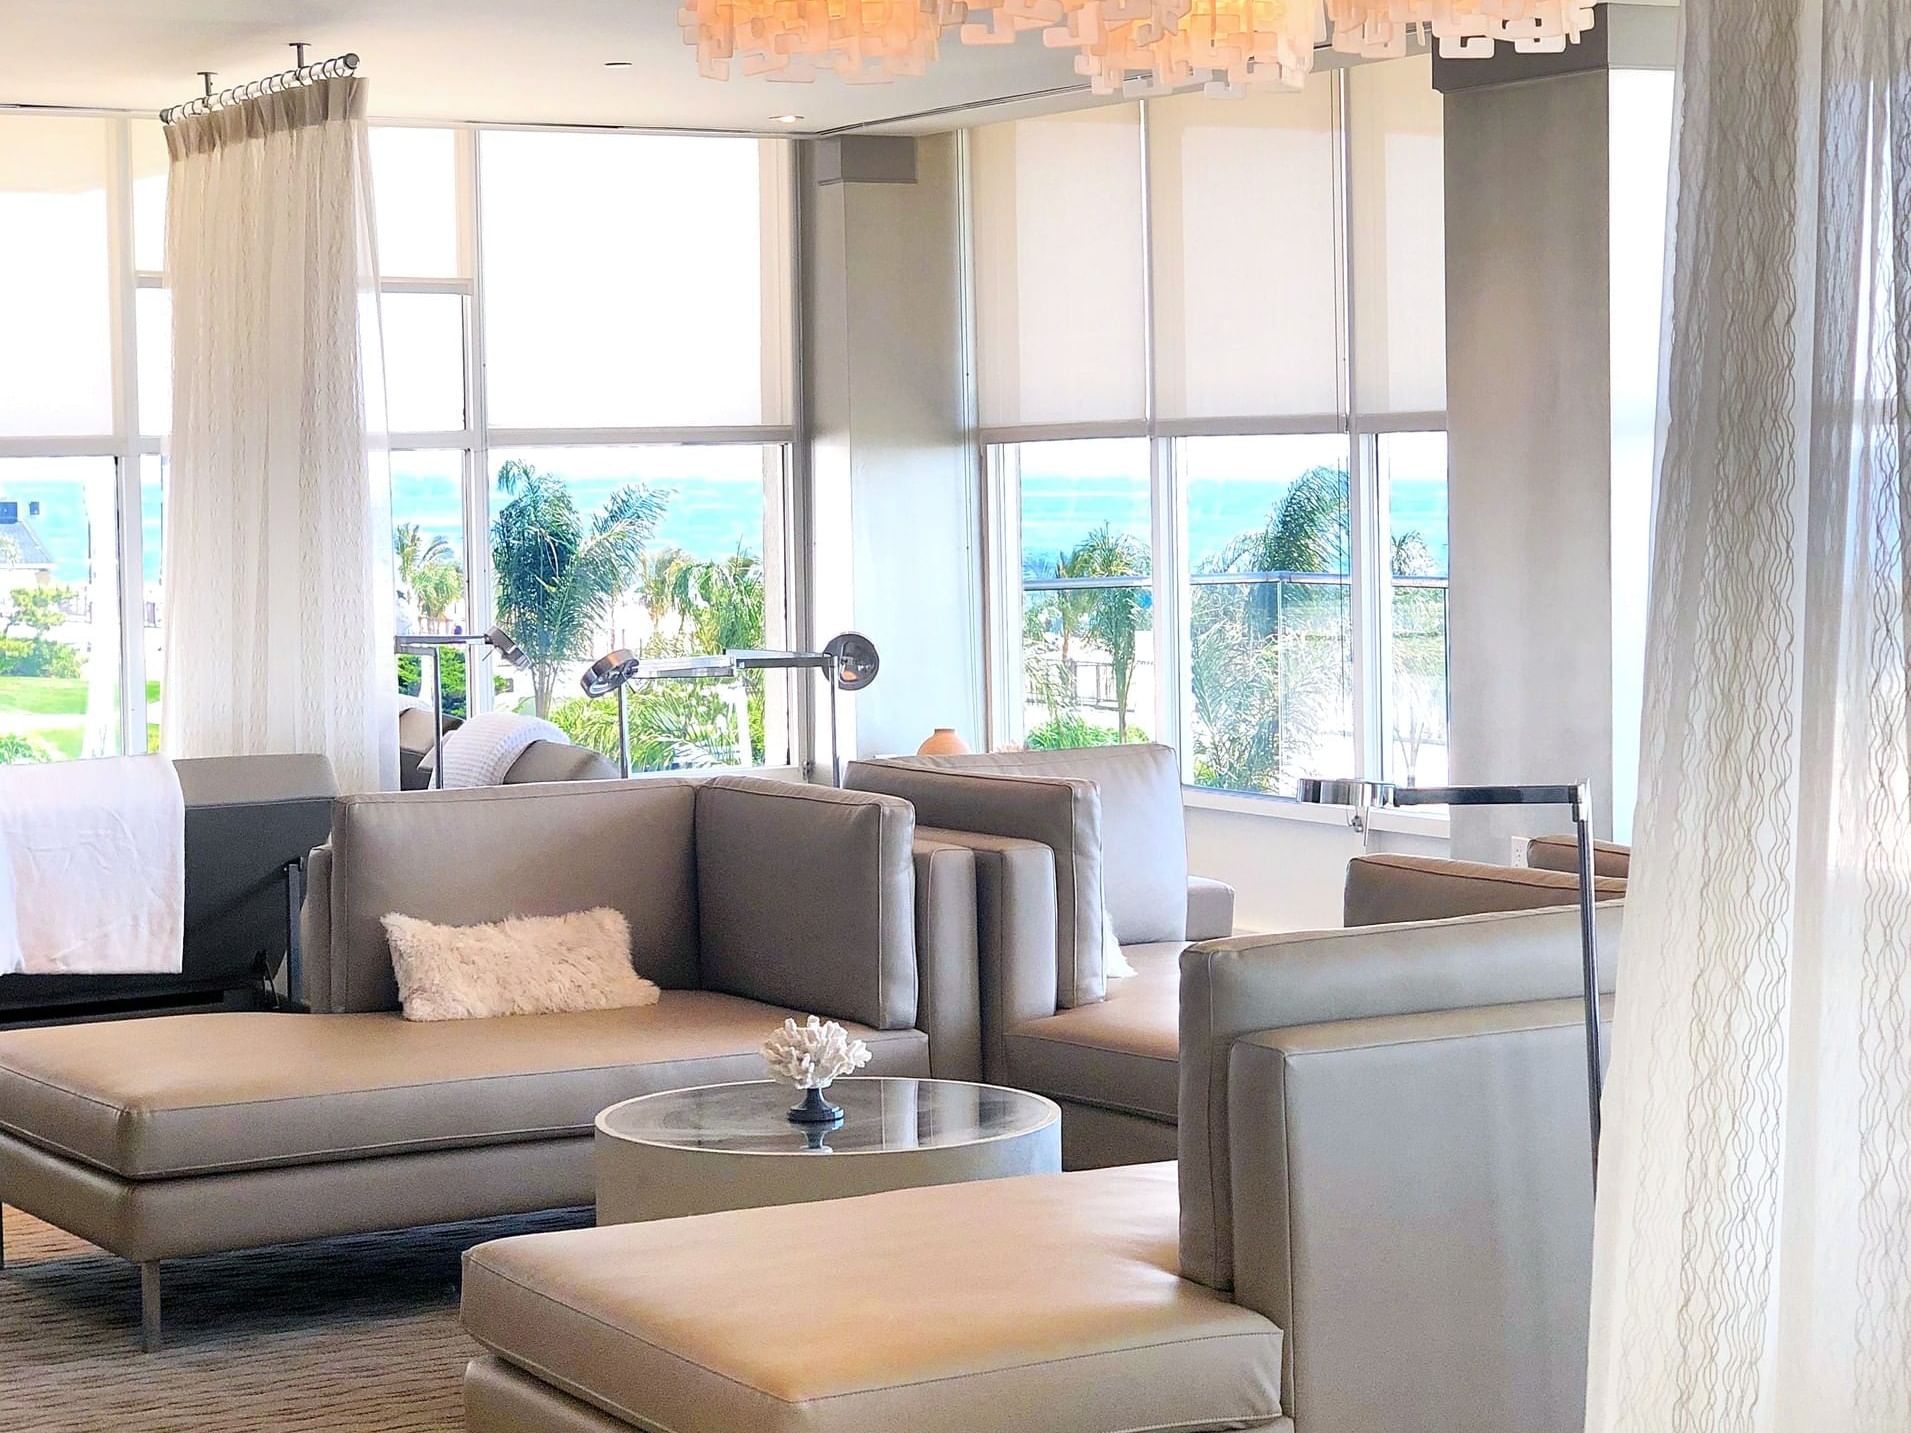 Lounge area in Spa etiquette at Ocean Place